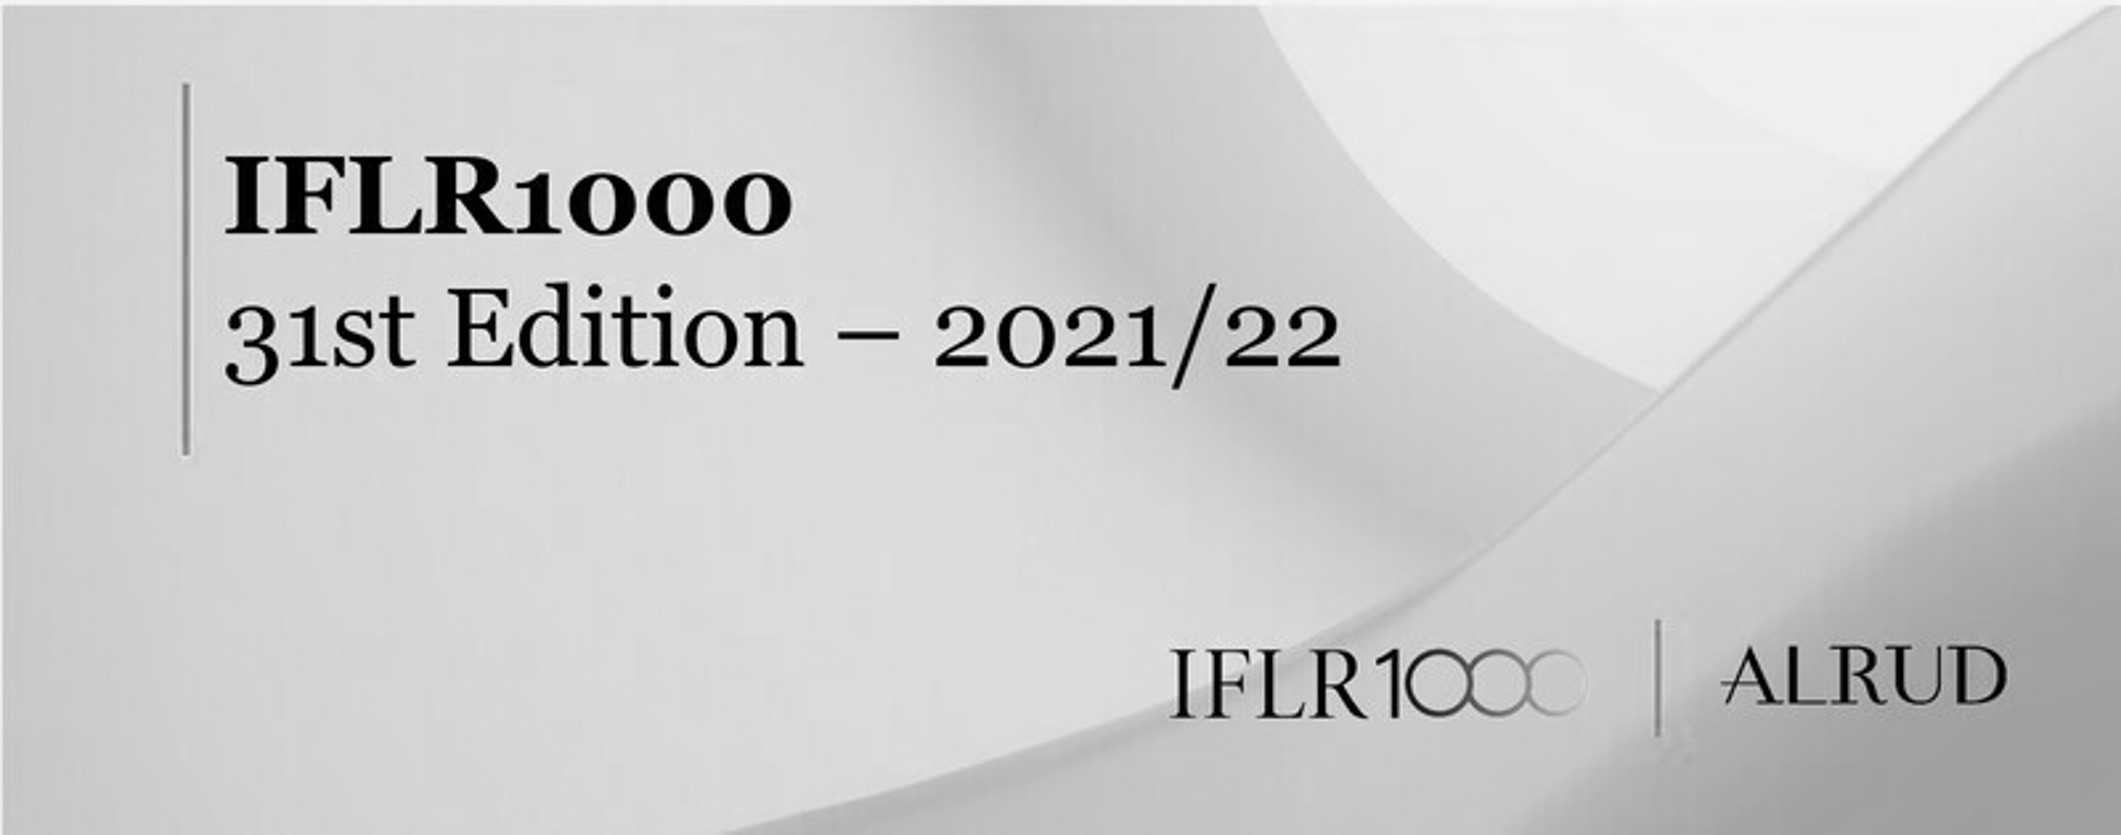 ALRUD confirms leading positions in the IFLR1000’s 31st 2021/22 edition